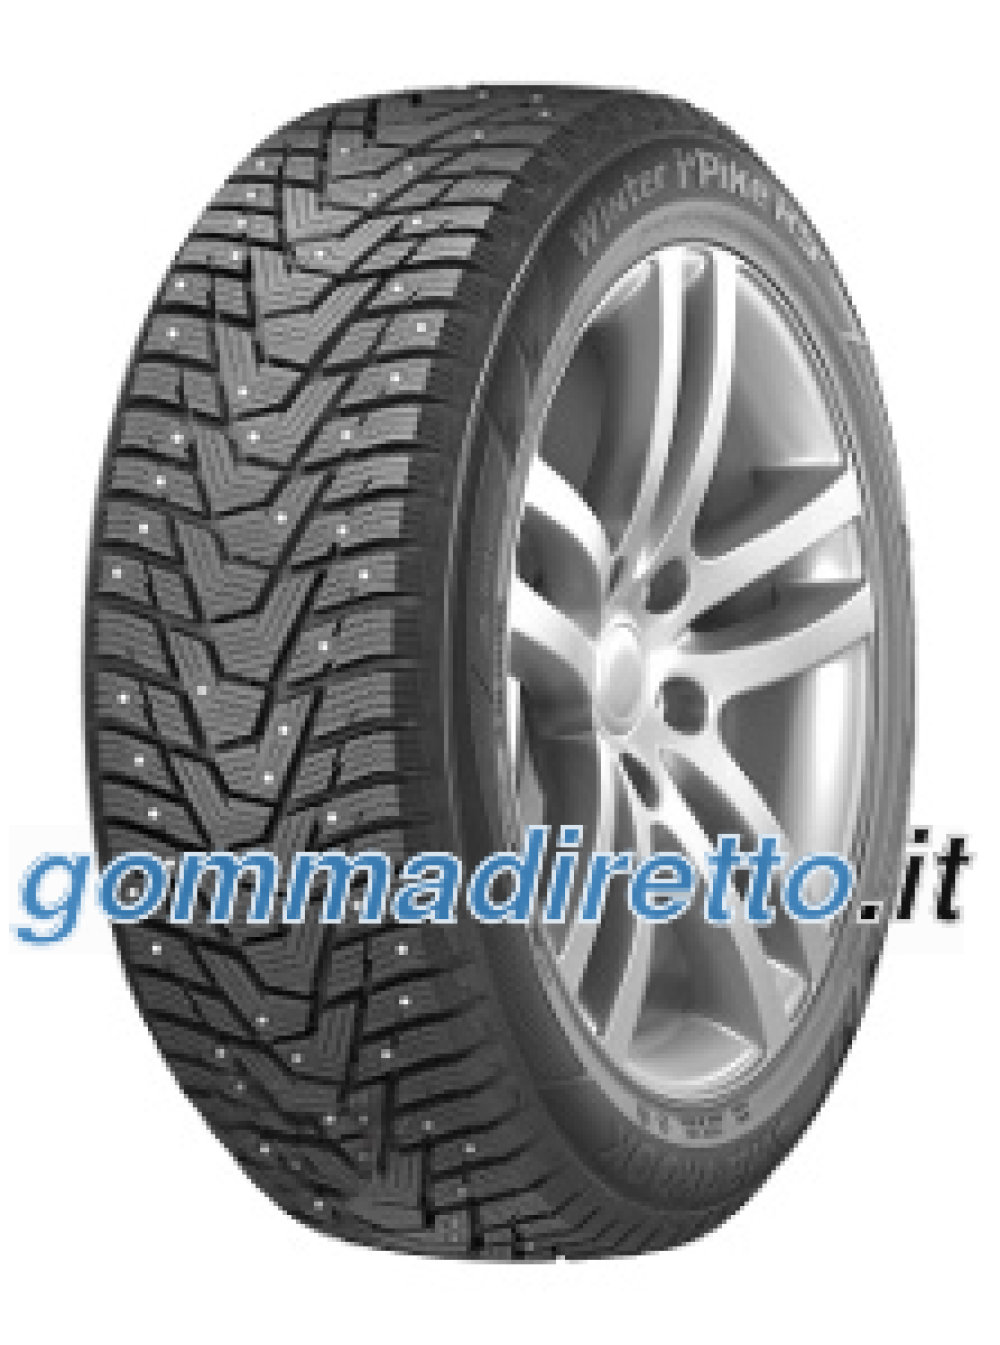 Image of Hankook Winter I*Pike RS2 W429 ( 185/55 R15 86T XL, pneumatico chiodato, SBL )